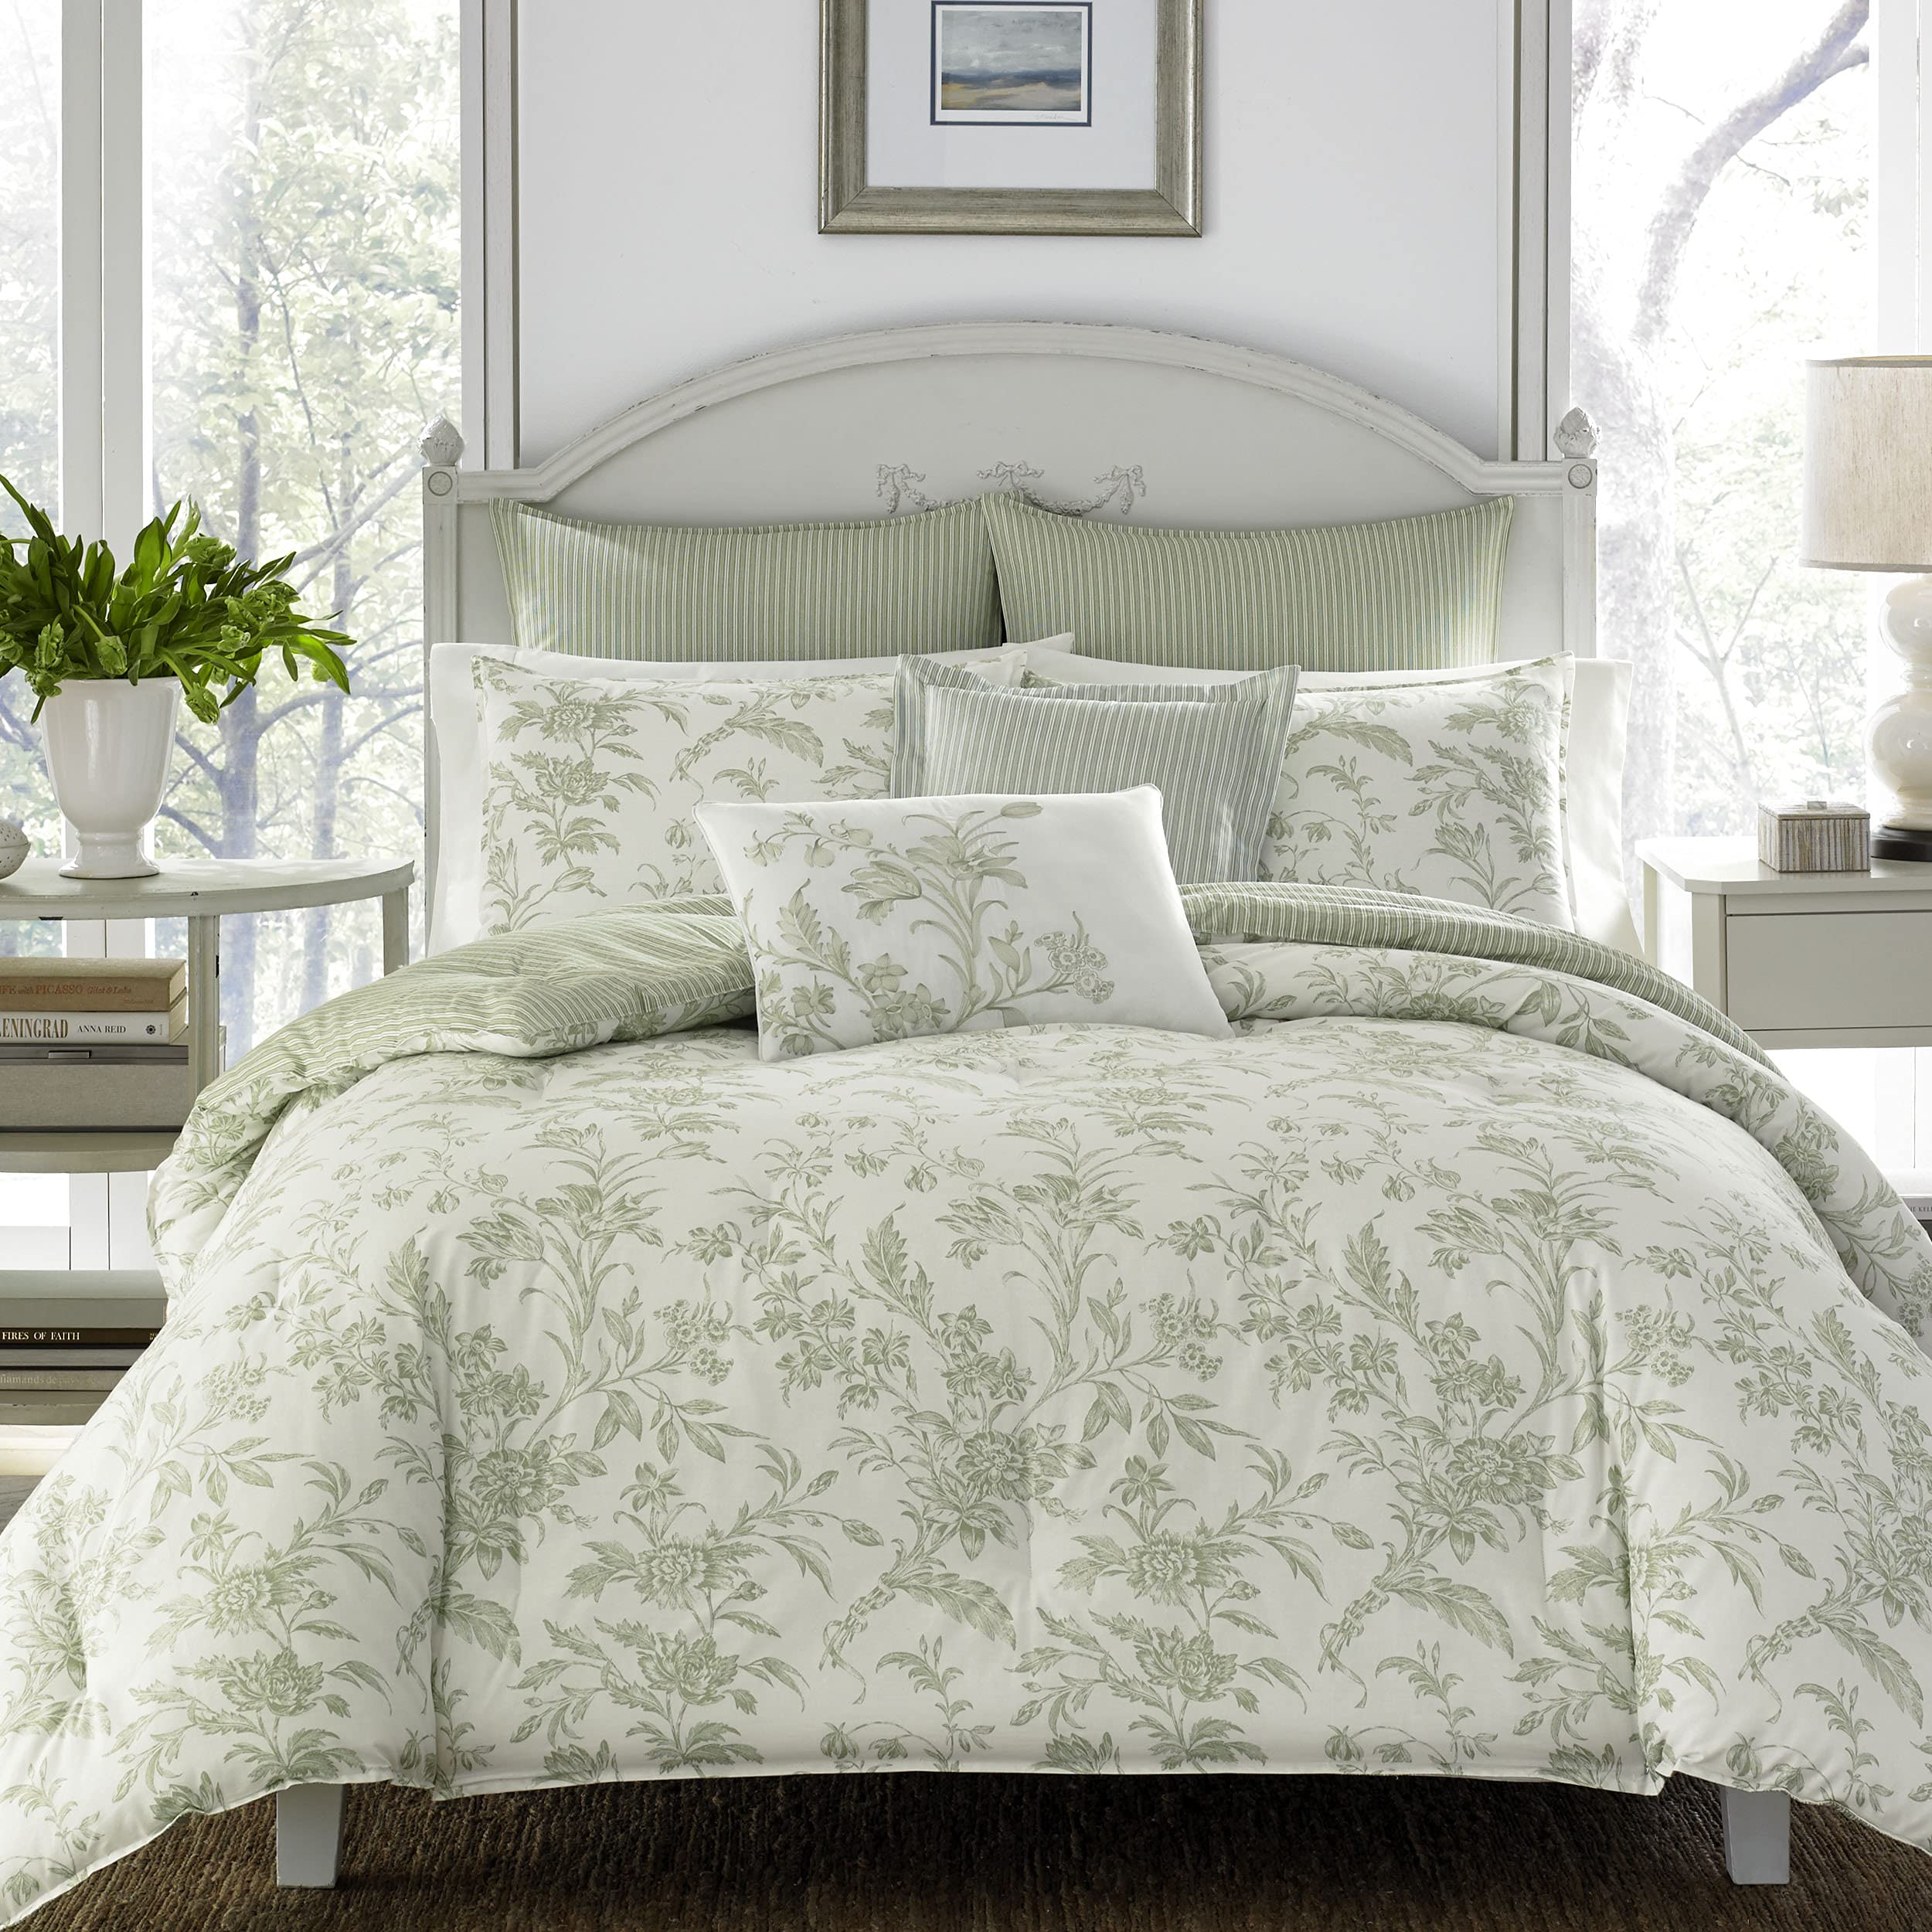 Book Cover Laura Ashley Home - Twin Size Comforter Set, Reversible Cotton Bedding, Includes Matching Sham with Bonus Euro Sham & Throw Pillows (Natalie Sage/Off White, Twin) Sage/Off White Twin